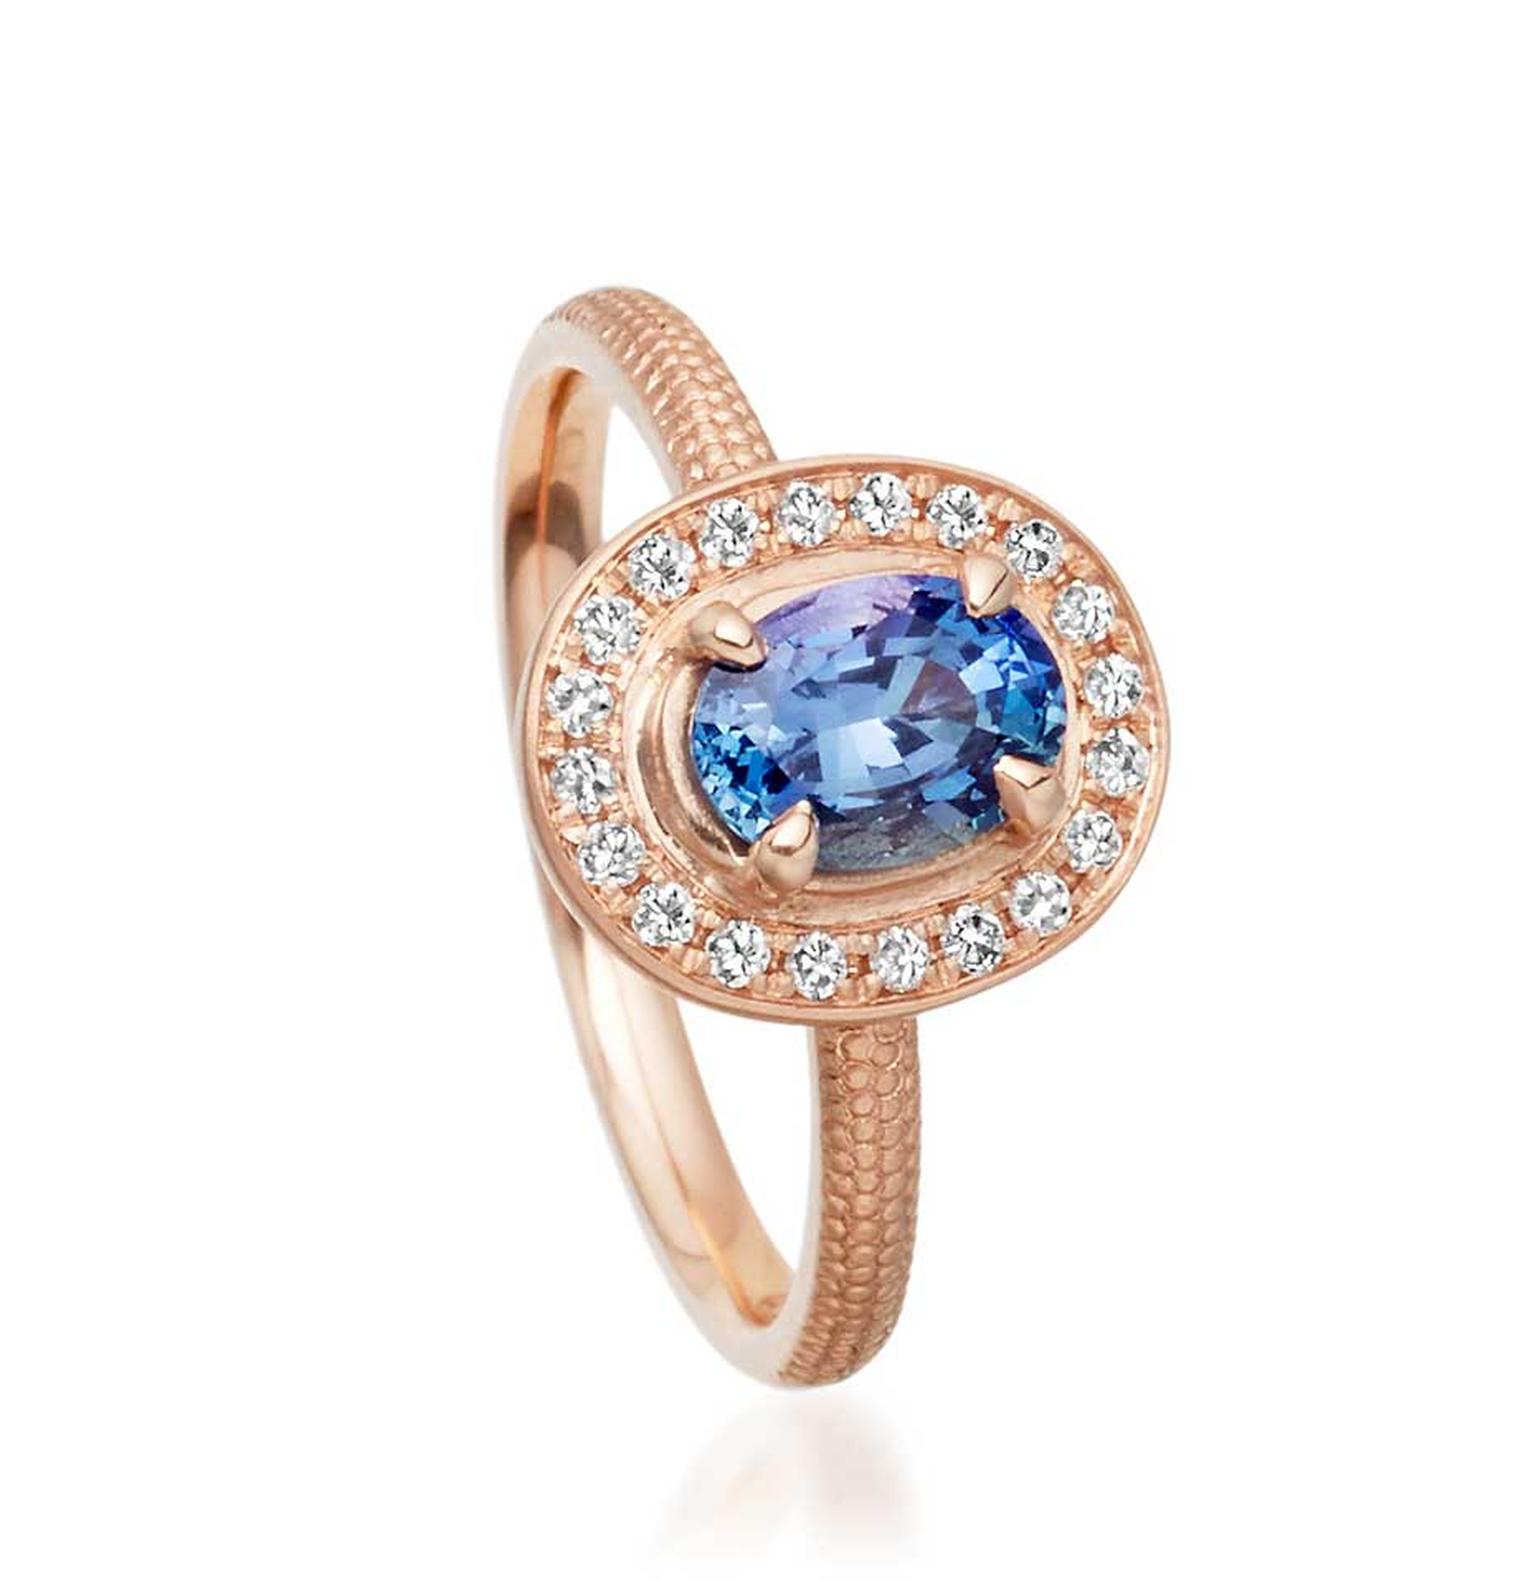 Anne Sportun Periwinkle blue sapphire engagement ring in rose gold, available from Astley Clarke (£3,250).